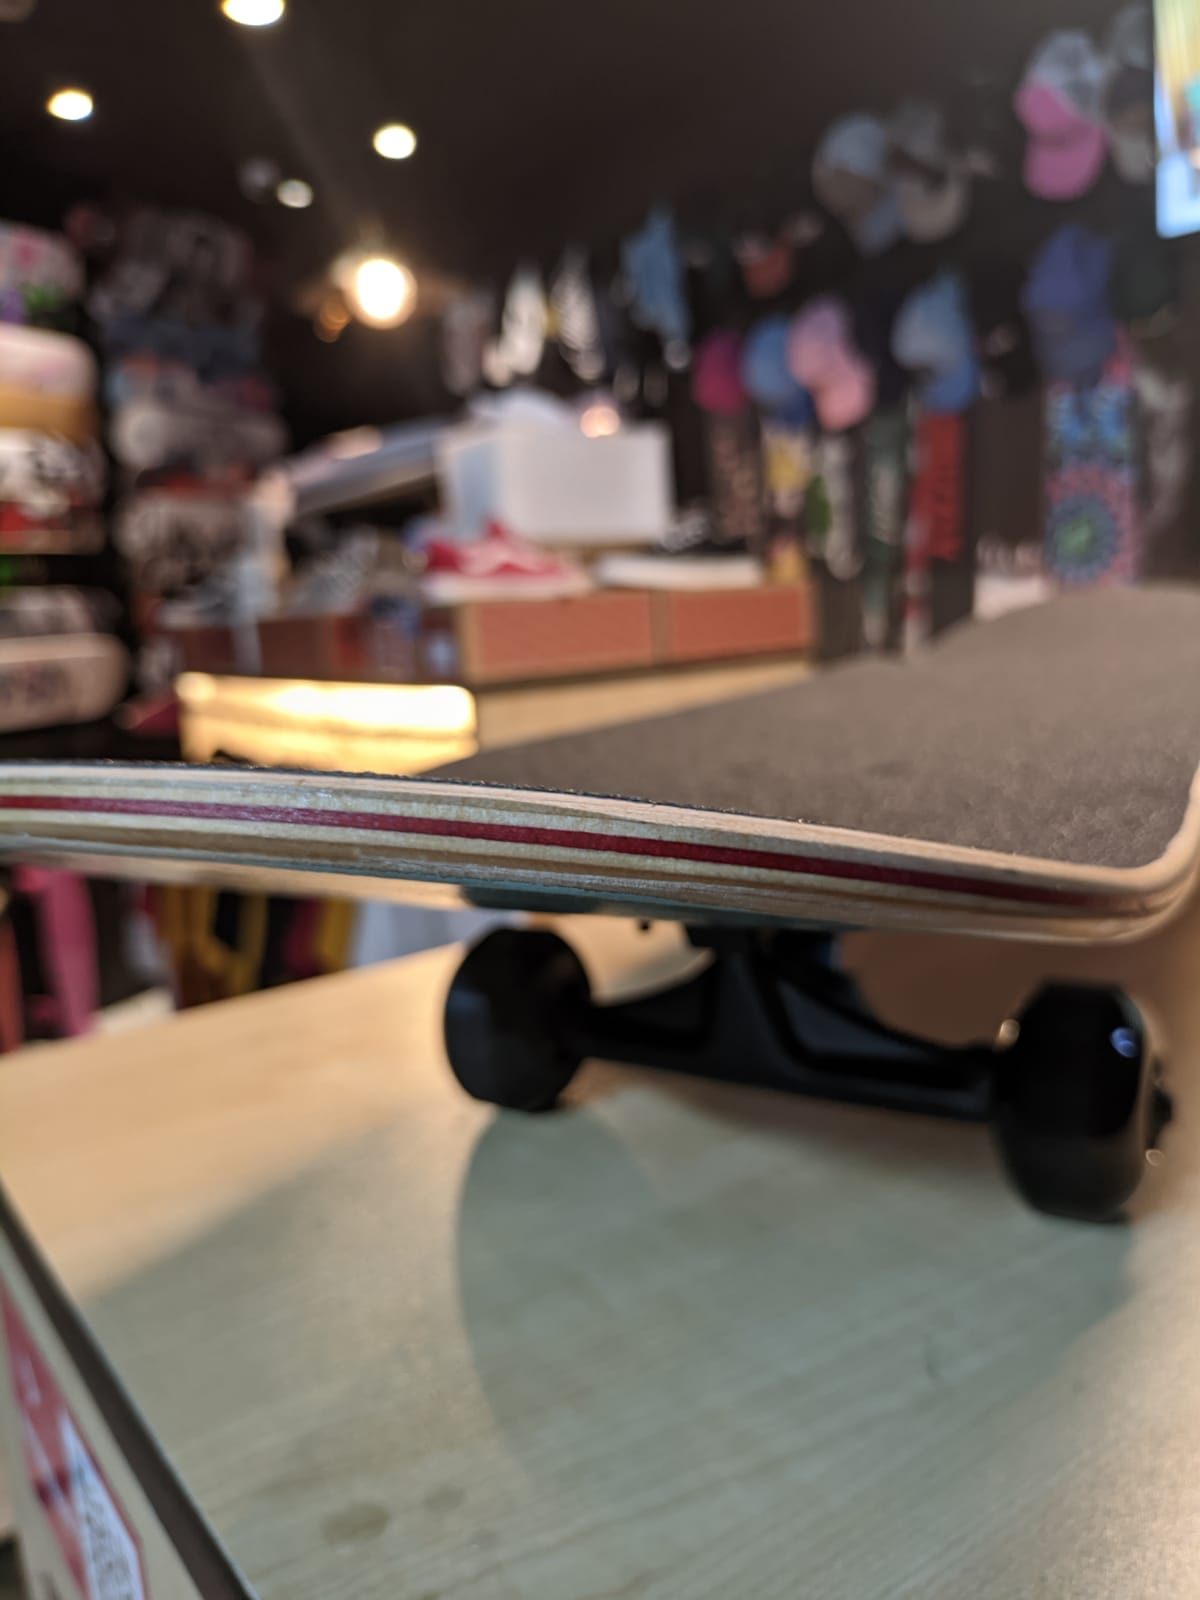 I poured my thoughts into an honest review, discussing both the ups and downs of those boards.